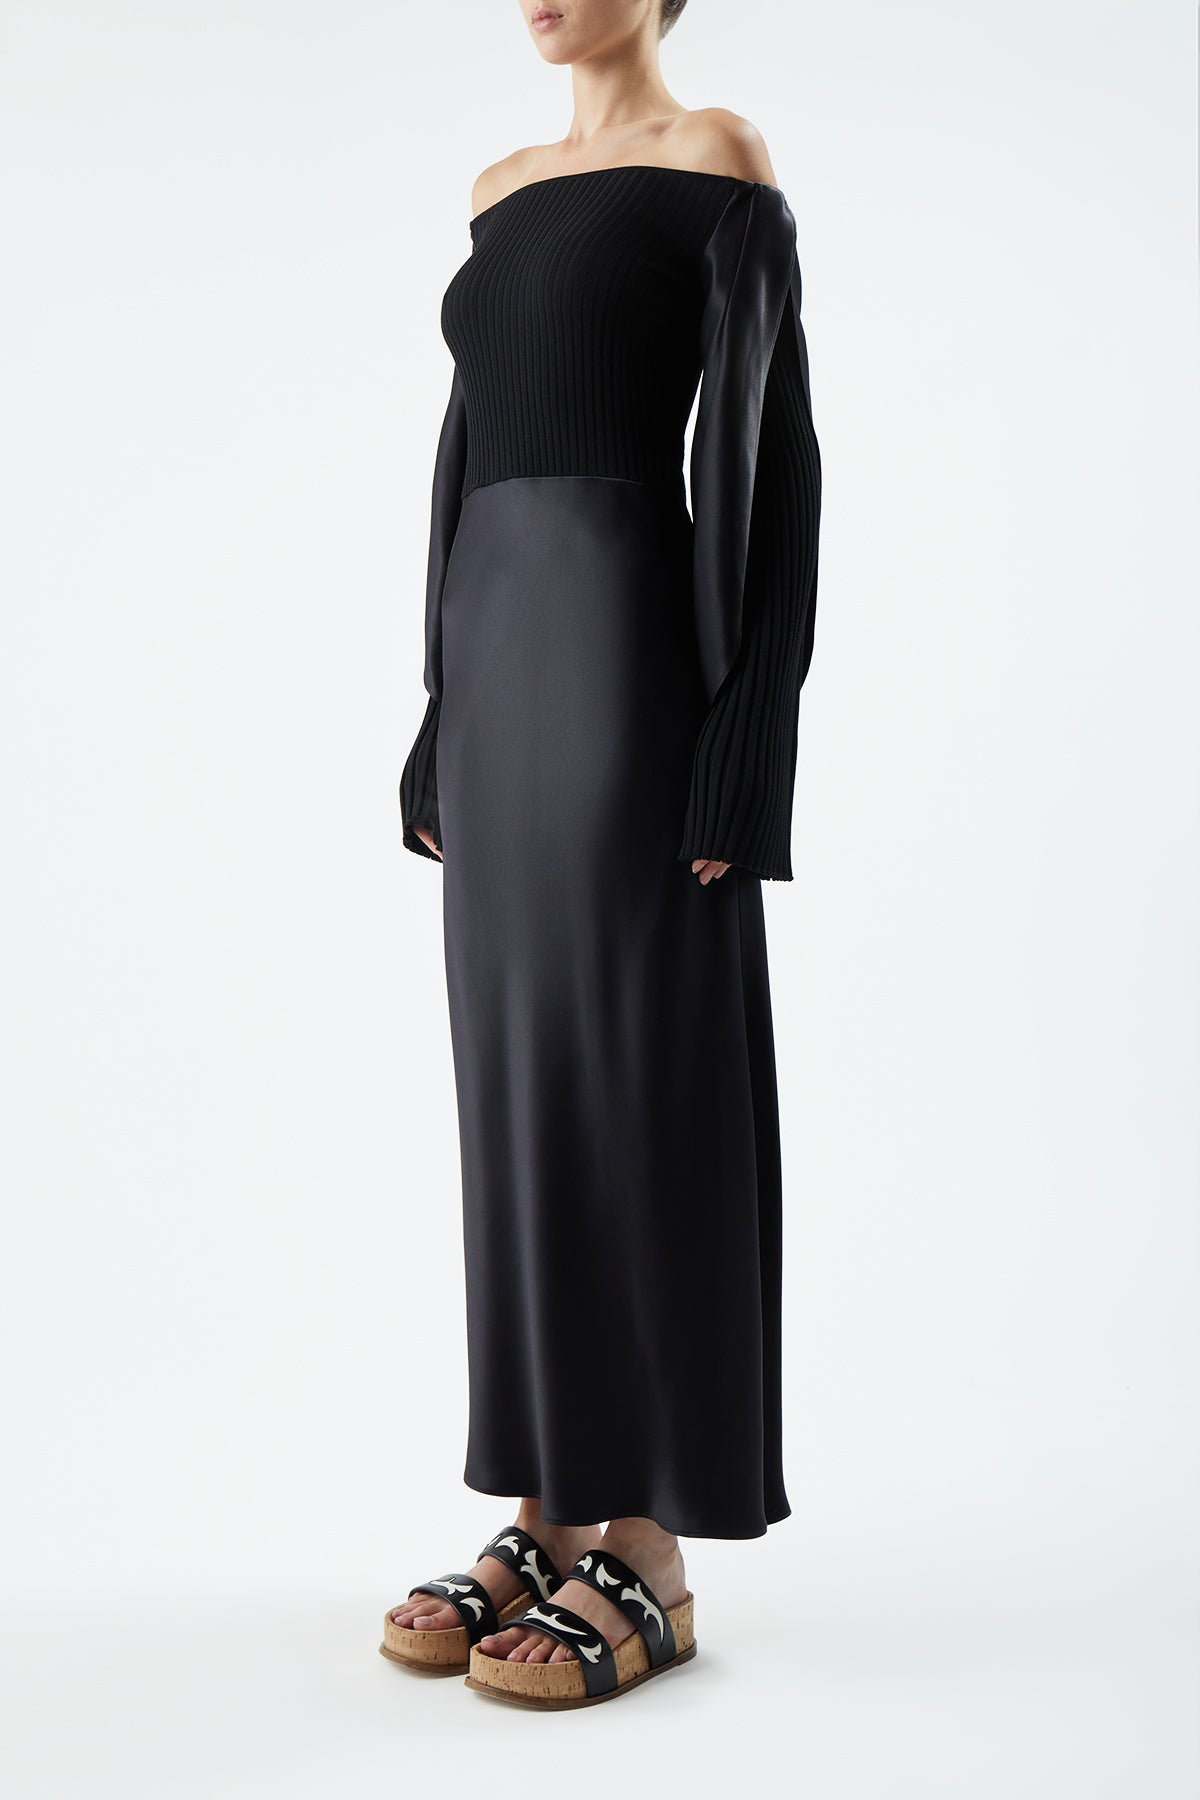 Gilman Dress in Black Cashmere and Silk